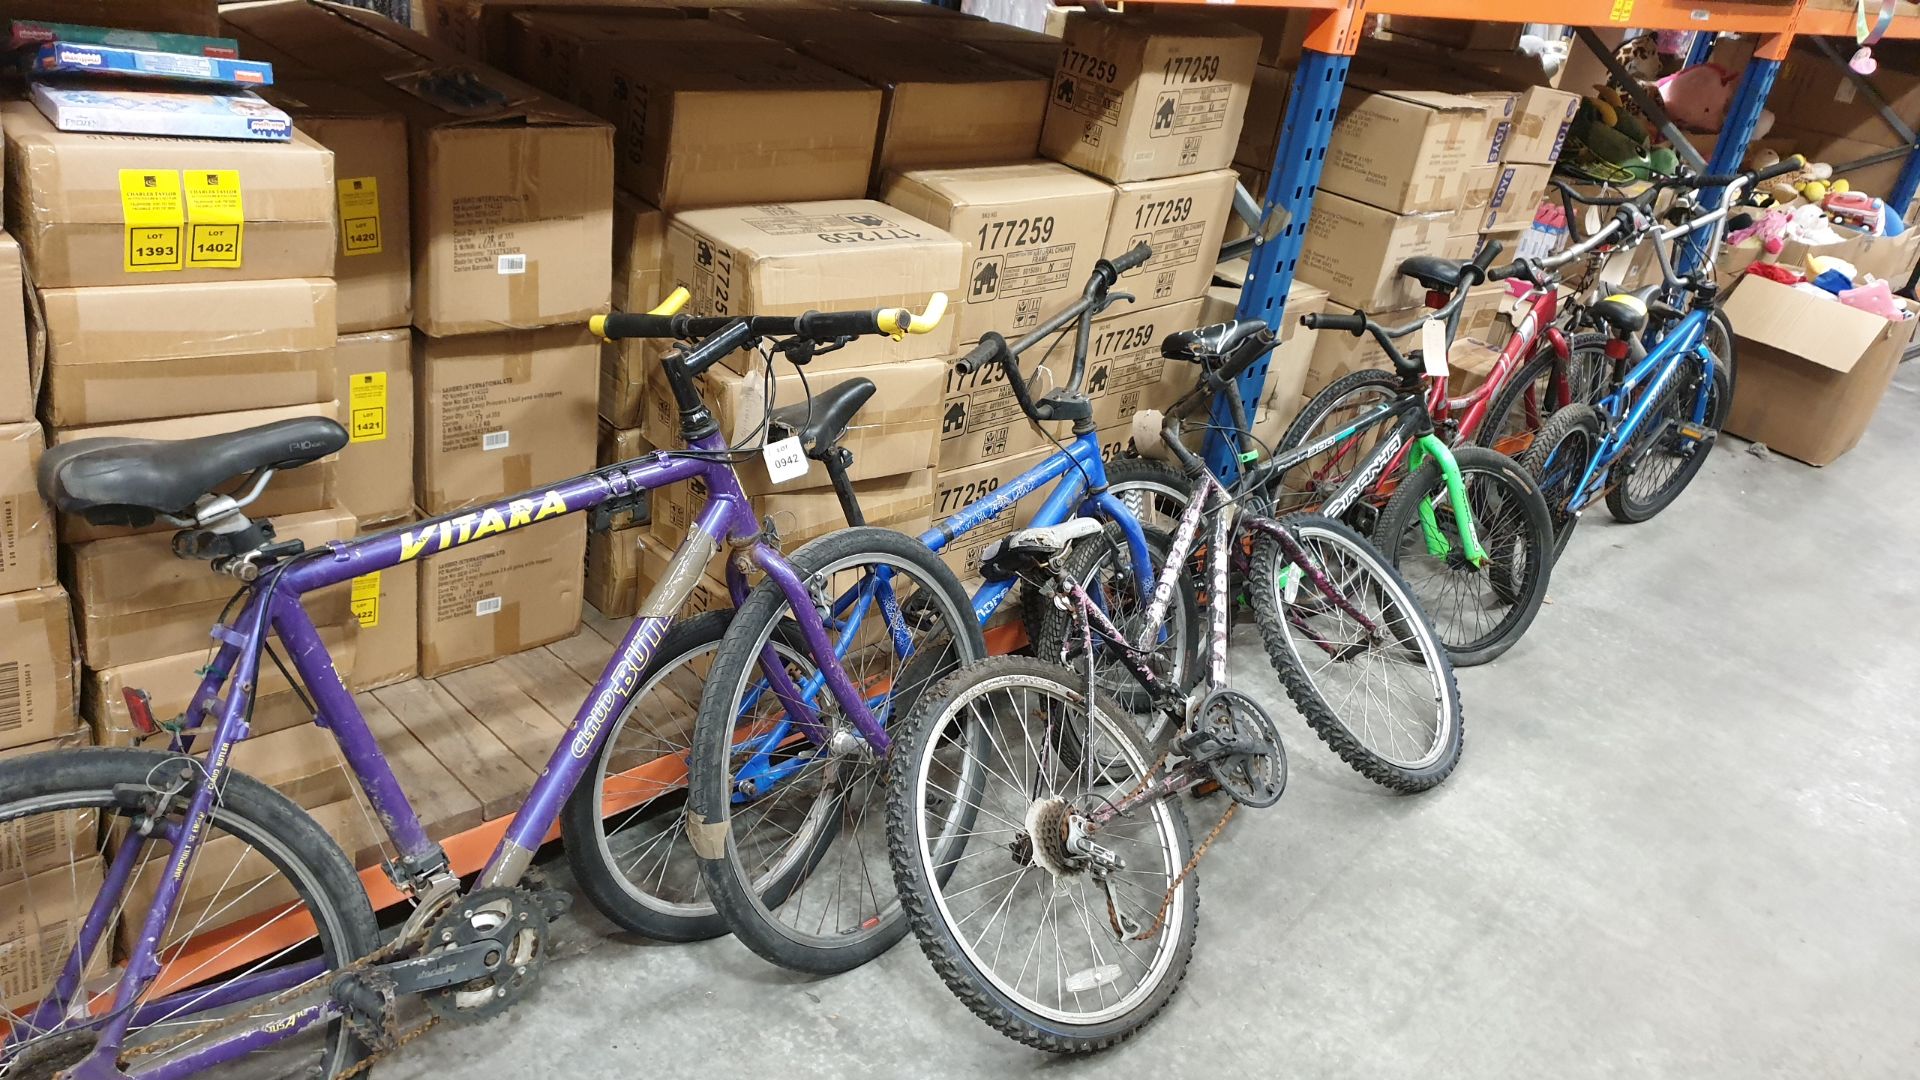 (LOT FOR THURSDAY 28TH MAY AUCTION) 8 ASSORTED BIKES IE. CLAUD BUTLER, FALCON, PIRANHA, SONIC AND